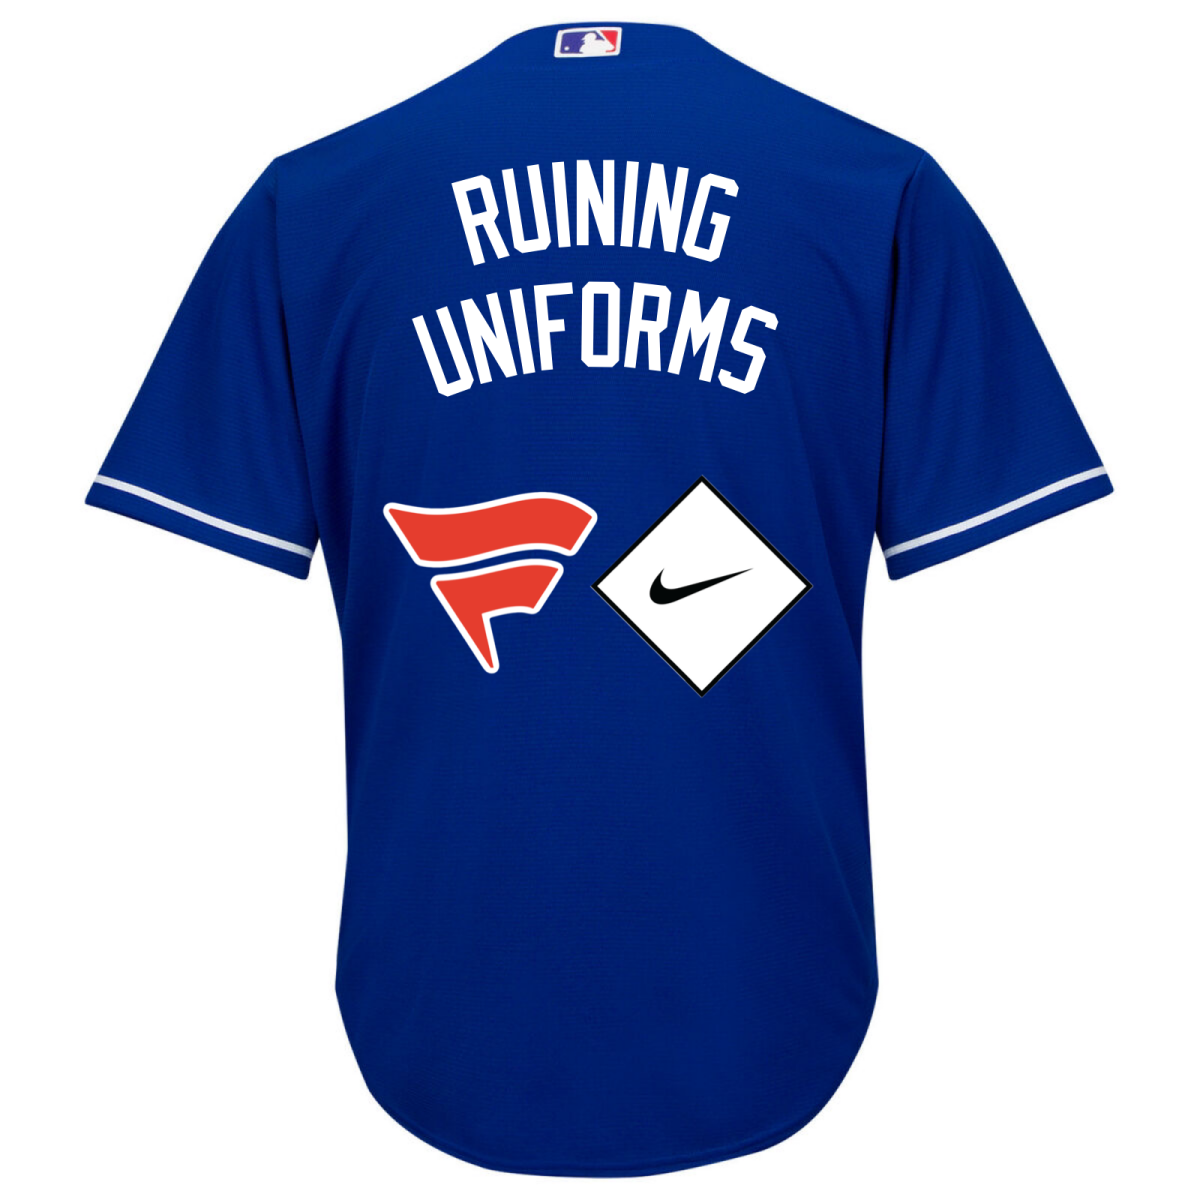 Blue Jays uniform with the writing “Ruining Uniforms” and the logos of Fanatics and Nike Baseball below it. 